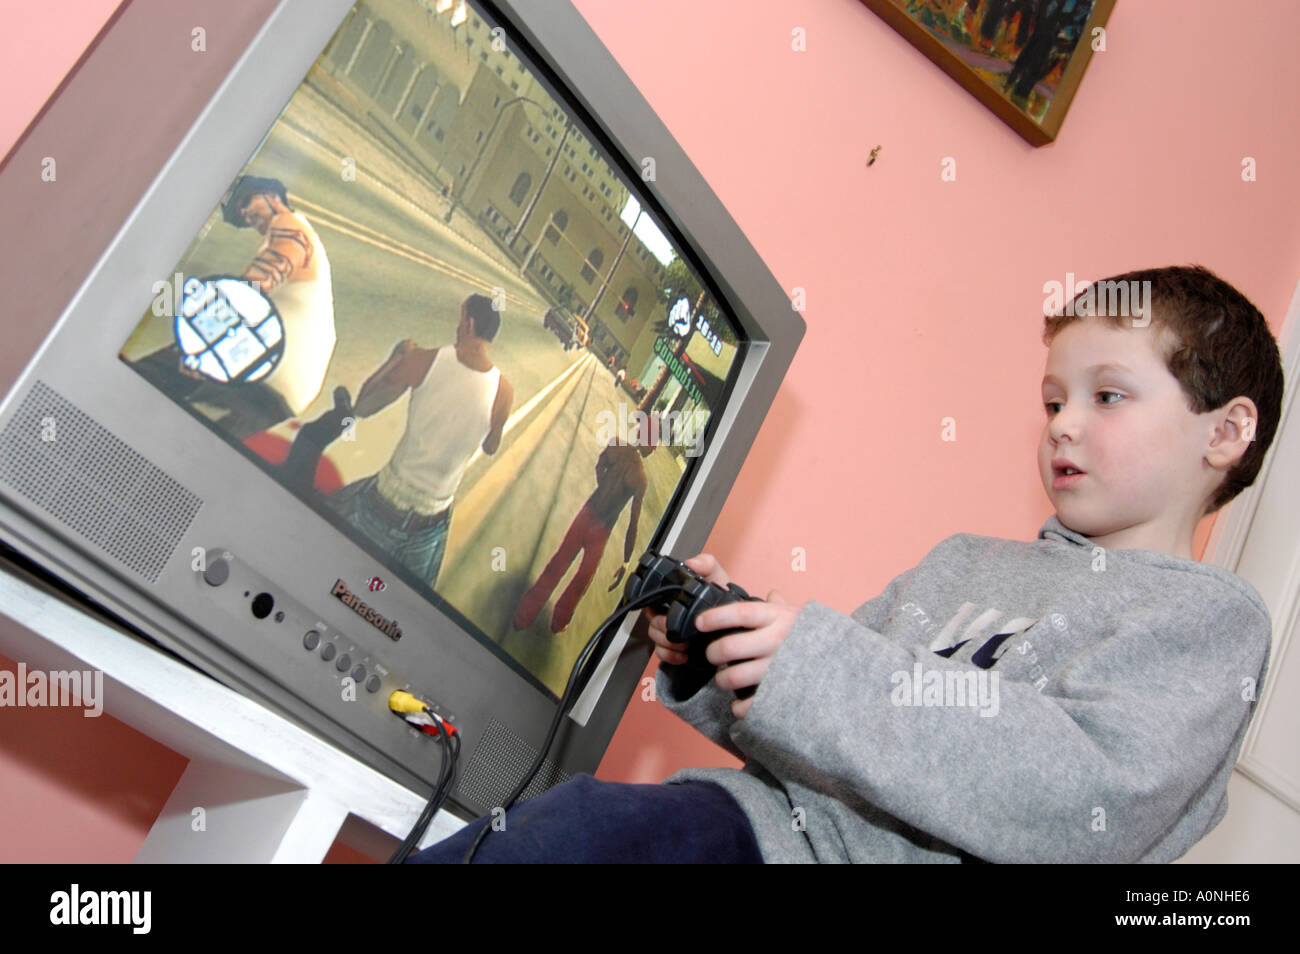 Young boy playing violent 18 certificate rated computer game Grand Theft Auto on Sony Playstation console, England, UK Stock Photo